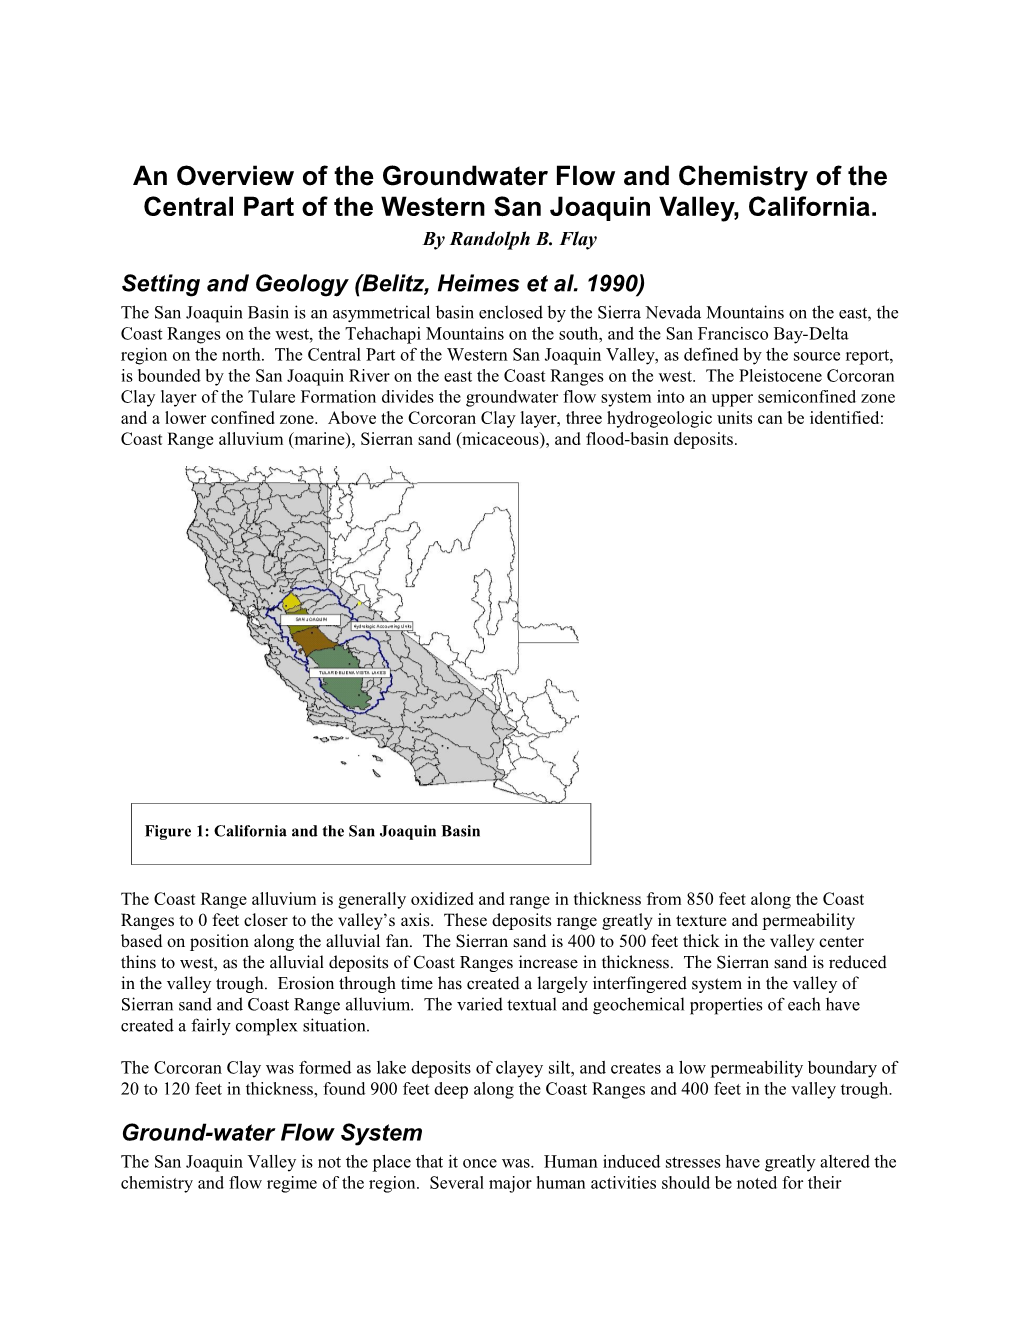 Fact Sheet #004-01: an Overview of the Groundwater Flow and Chemistry of the Central Part